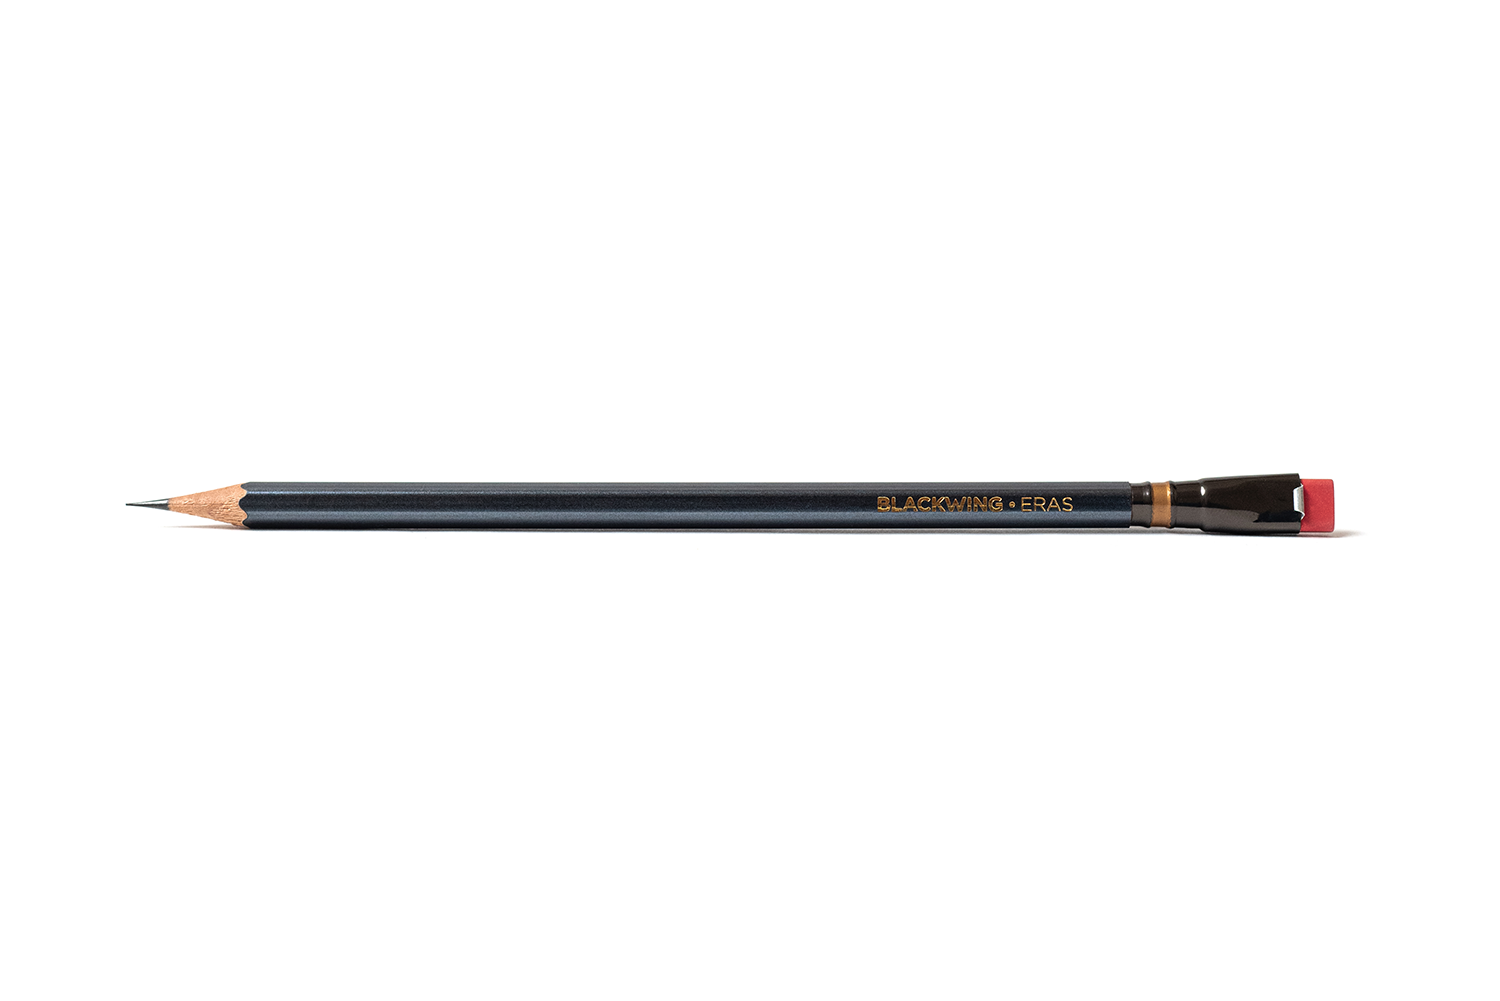 Blackwing Eras limited edition